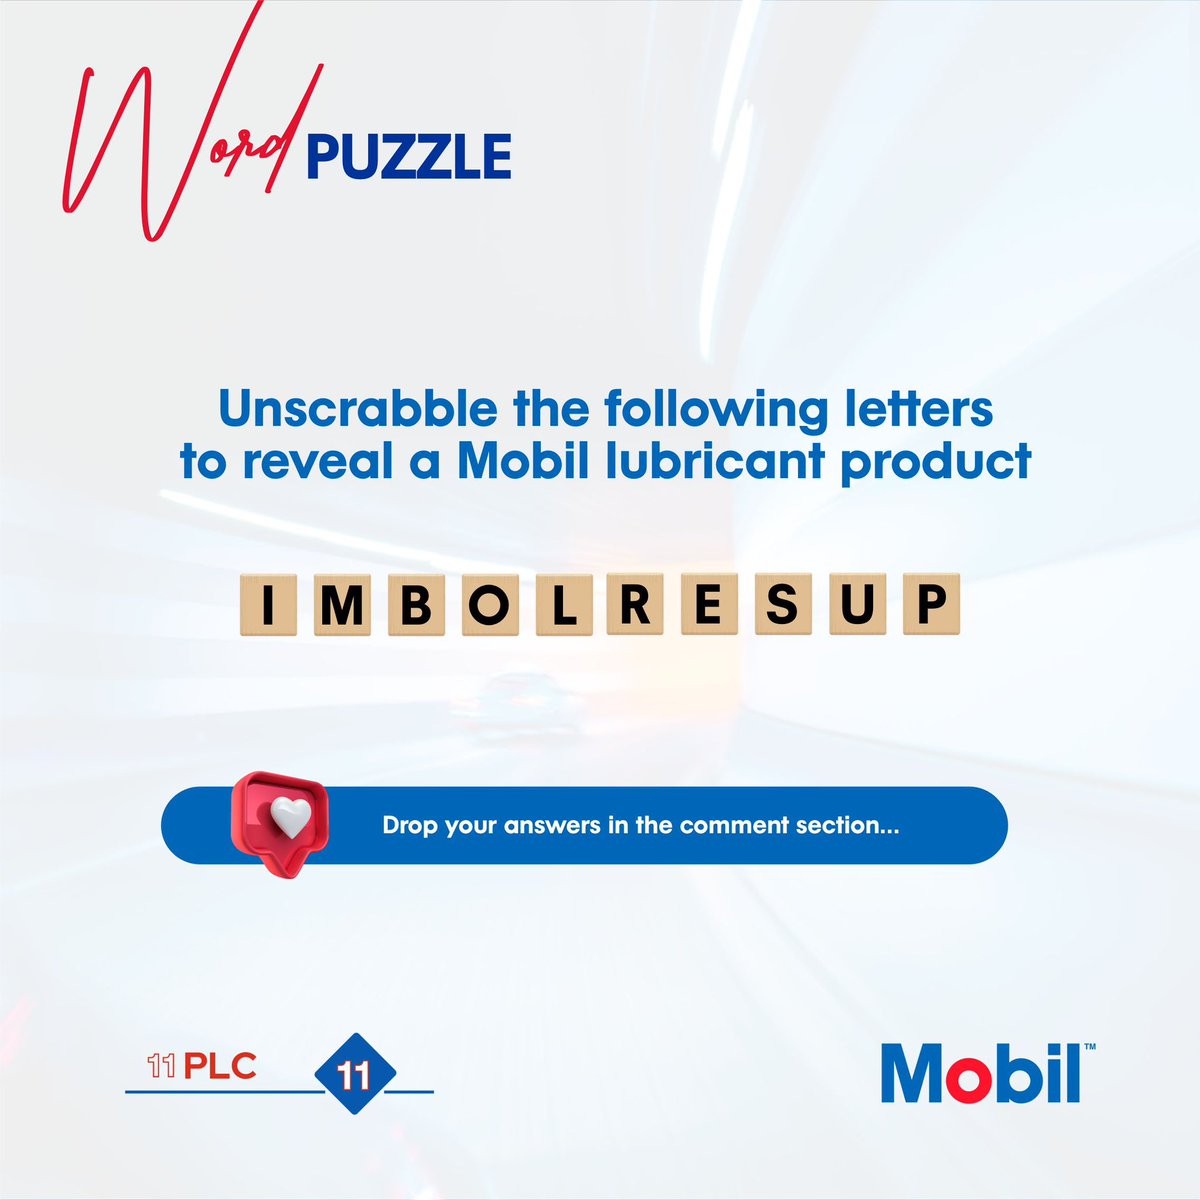 Can you solve a puzzle? Unscramble the Following letters to reveal a Mobil Product.

#triviathursday #puzzle #mobillubricants #mobilinnigeria